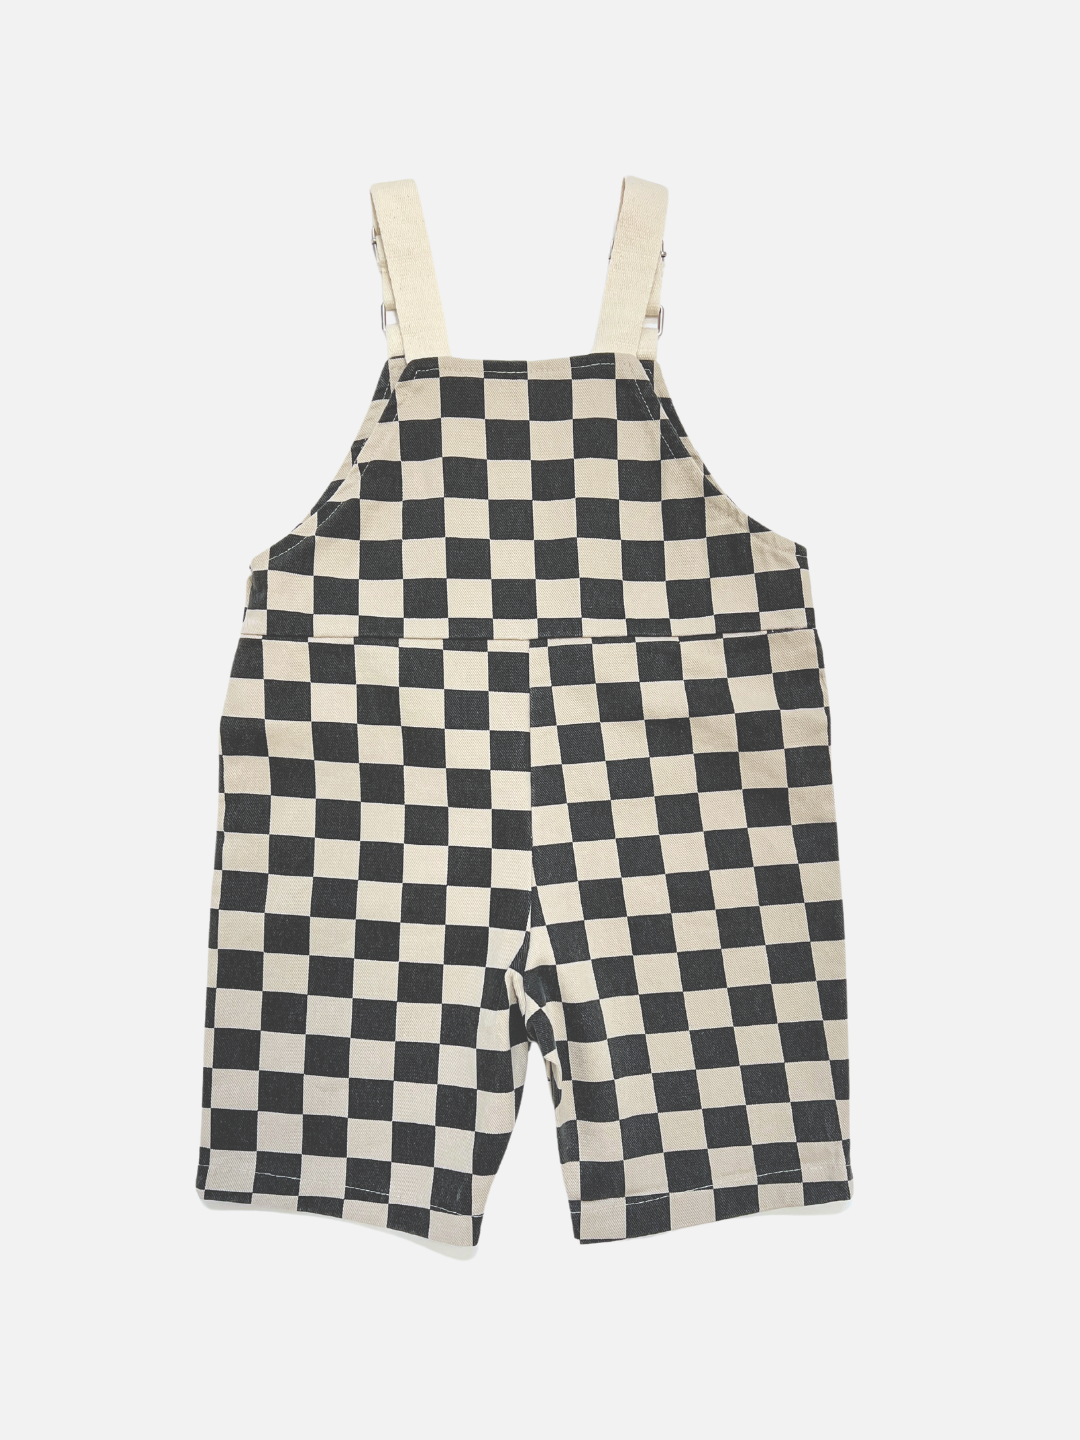 A back view of kid's checker overall in off-white